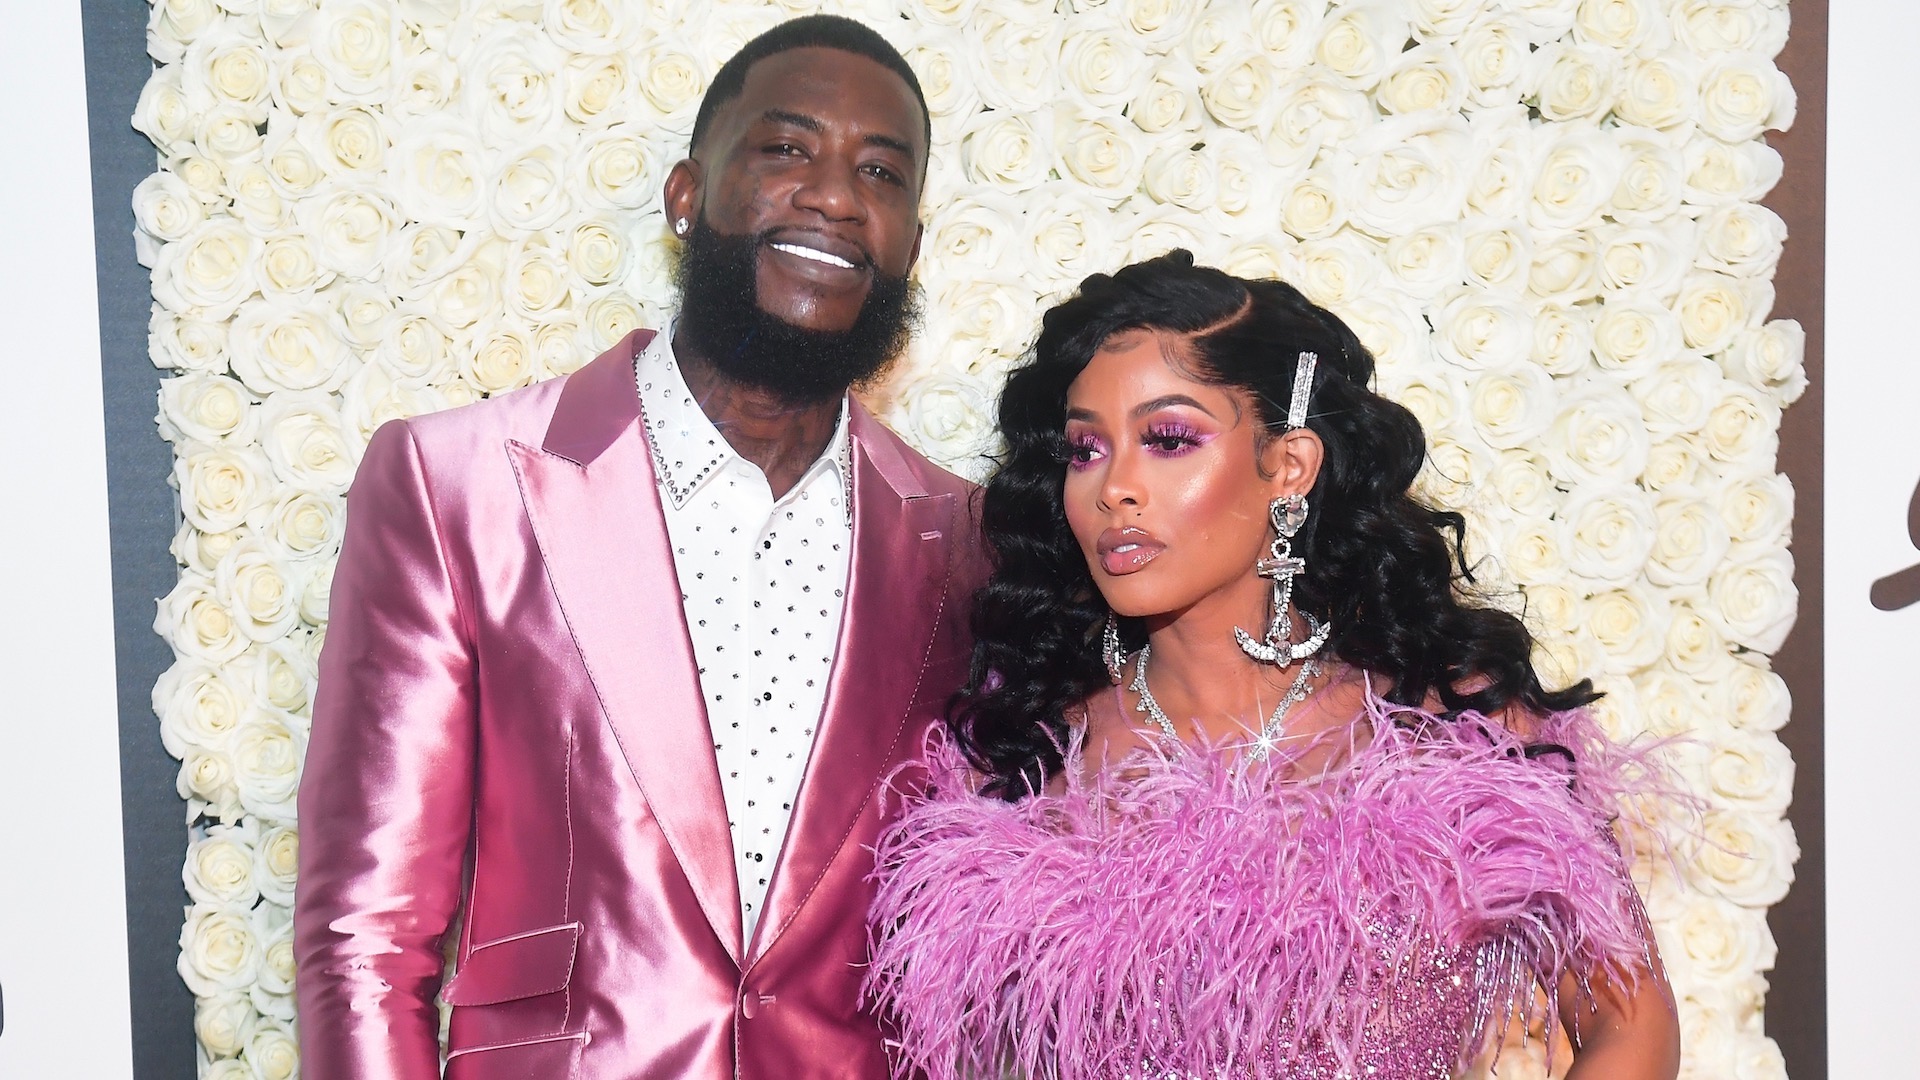 Gucci Mane and Keyshia Ka'oir Are Expecting Their First Child